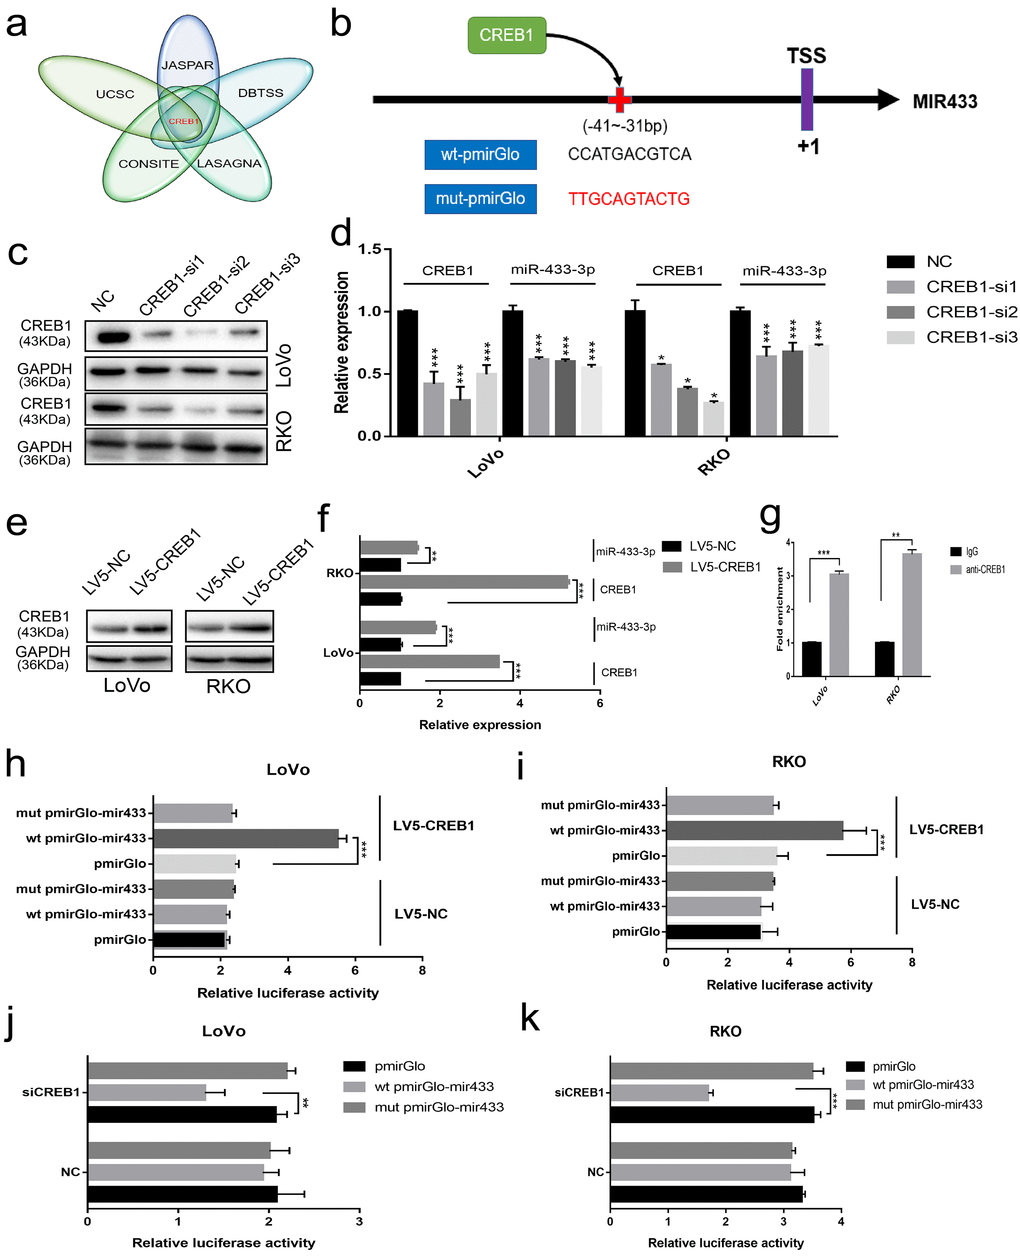 CREB1 transactivated the expression of miR-433. (a) UCSC aligned DBTSS, JASPAR, CONSITE and LASAGNA databases demonstrated that CREB1 could bind to the promotor region of miR-433. (b) The predicted binding sites and mutation sequences are presented. (c-d) Downregulation of miR-433-3p was observed when CREB1 was silenced with siRNA at the mRNA and protein level in LoVo and RKO cells through real-time PCR and western blot. (e-f) The expression of miR-433-3p was subsequently upregulated after overexpression of CREB1 in LoVo and RKO cells by qRT-PCR and western blot. (g) ChIP-qPCR assay indicated that anti-CREB1 enriched much more DNA fragment which contains putative CREB1 binding site on the miR-433 promotor relative to IgG. (h-k) Luciferase assays confirmed the specific targeting relationship between CREB1 and the miR-433 promotor (pmirGlo, empty luciferase reporter vector; wt pmirGlo-mir433, wild-type luciferase reporter plasmid of miR-433 promotor containing putative CREB1 binding site; mut pmirGlo-mir433, luciferase reporter plasmid of miR-433 promotor which mutated putative CREB1 binding site; LV5-NC, lentivirus package of empty vector; LV5-CREB1, lentivirus package of CREB1 overexpressing plasmid). *, ppp